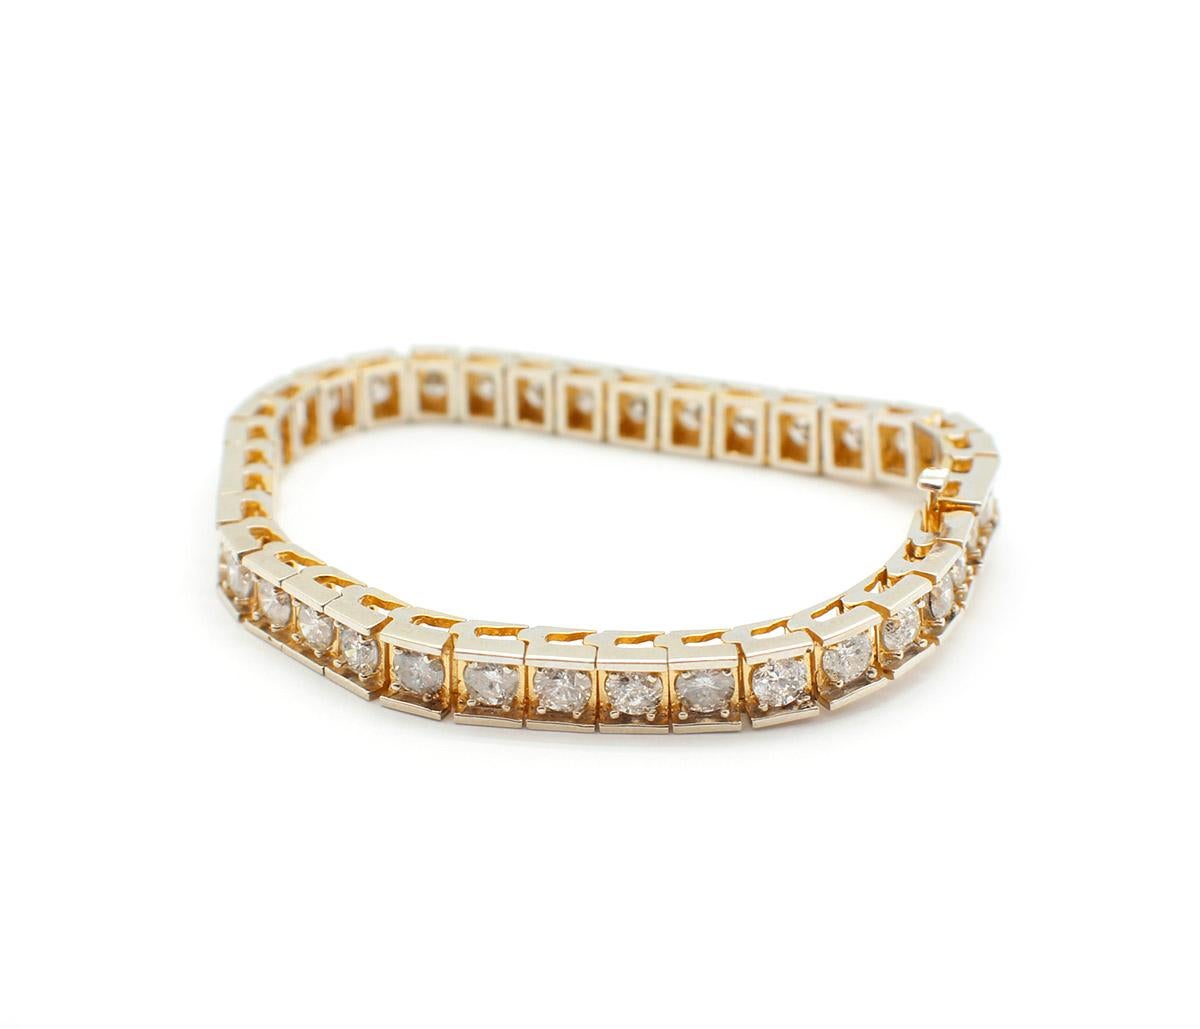 This stylish bracelet is designed with 14k yellow gold. Set in each square link, are round diamonds. The diamonds are held in place by 4 gold prongs. In total the 36 diamonds have 7.70cttw, they are H-I in color, and I1 in clarity. The bracelet has